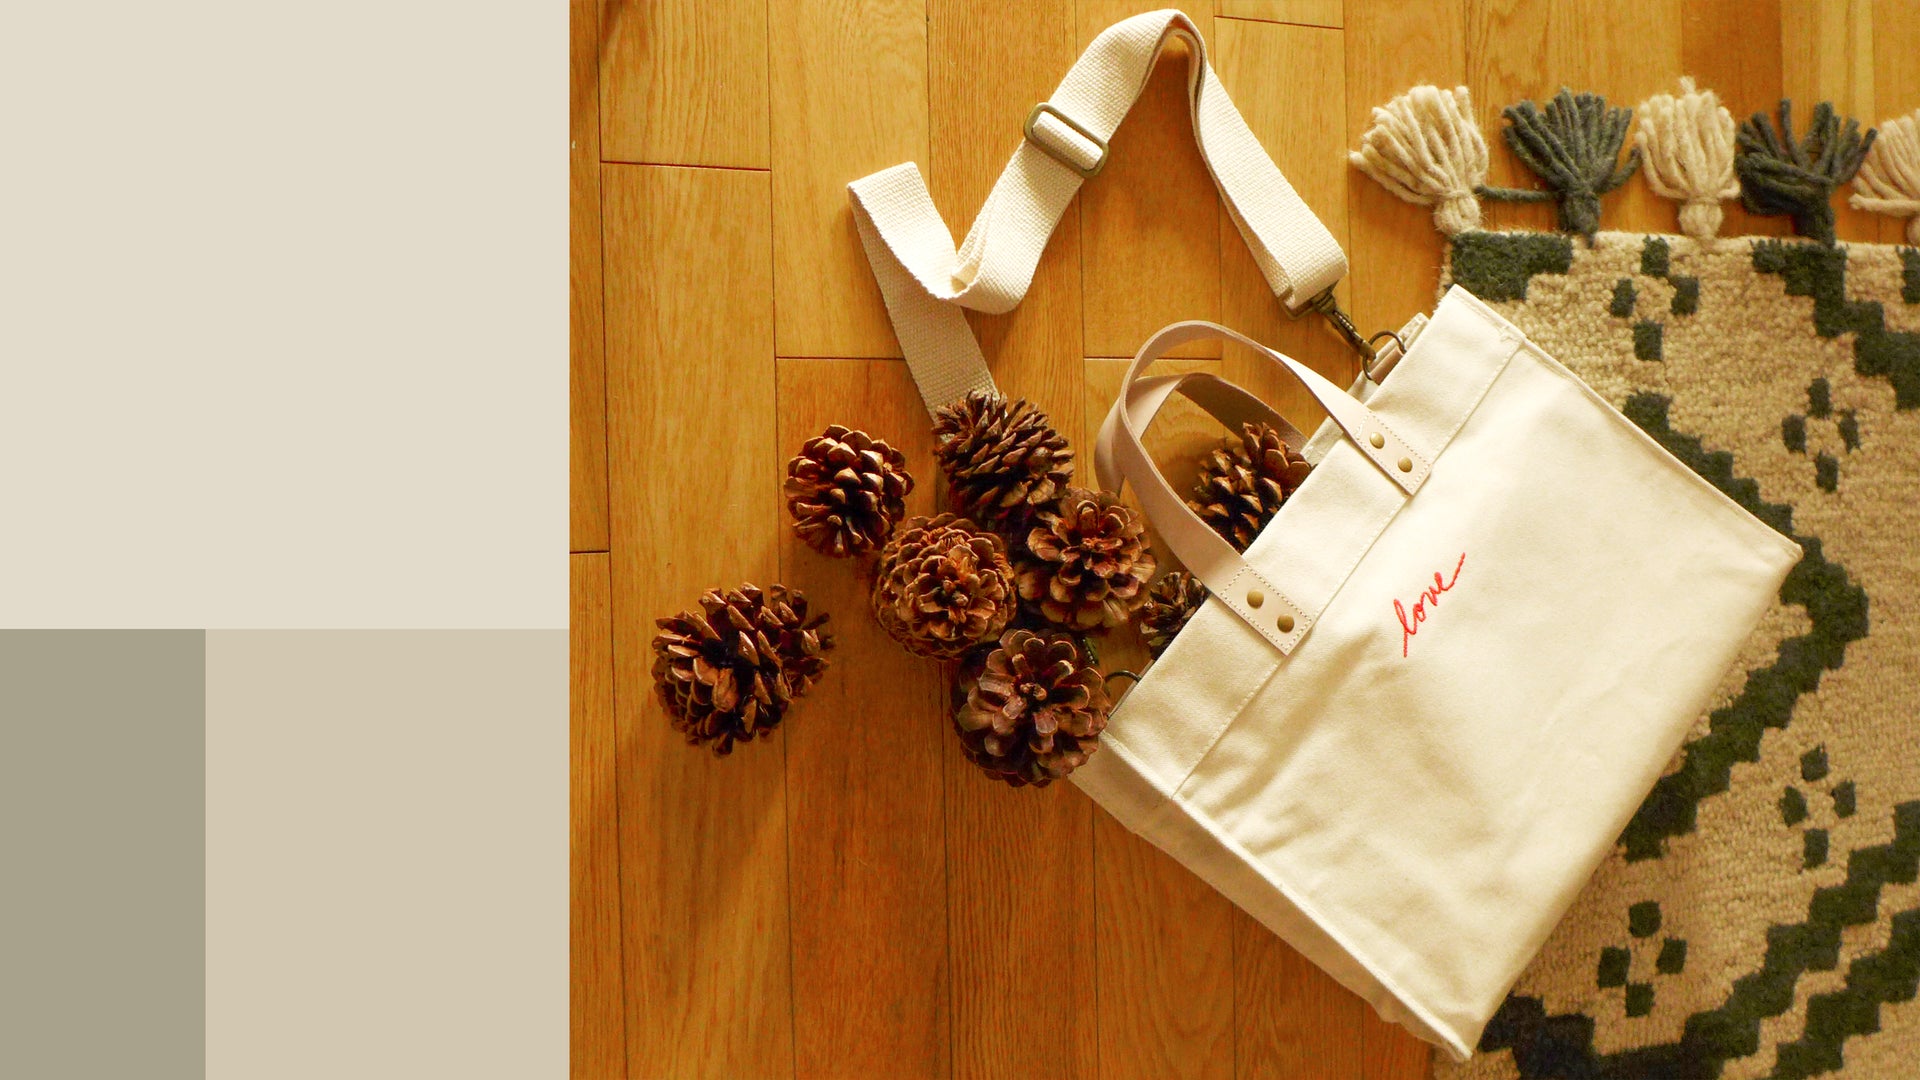 ED Ellen DeGeneres recyclable love totes with flowers and twigs coming out them